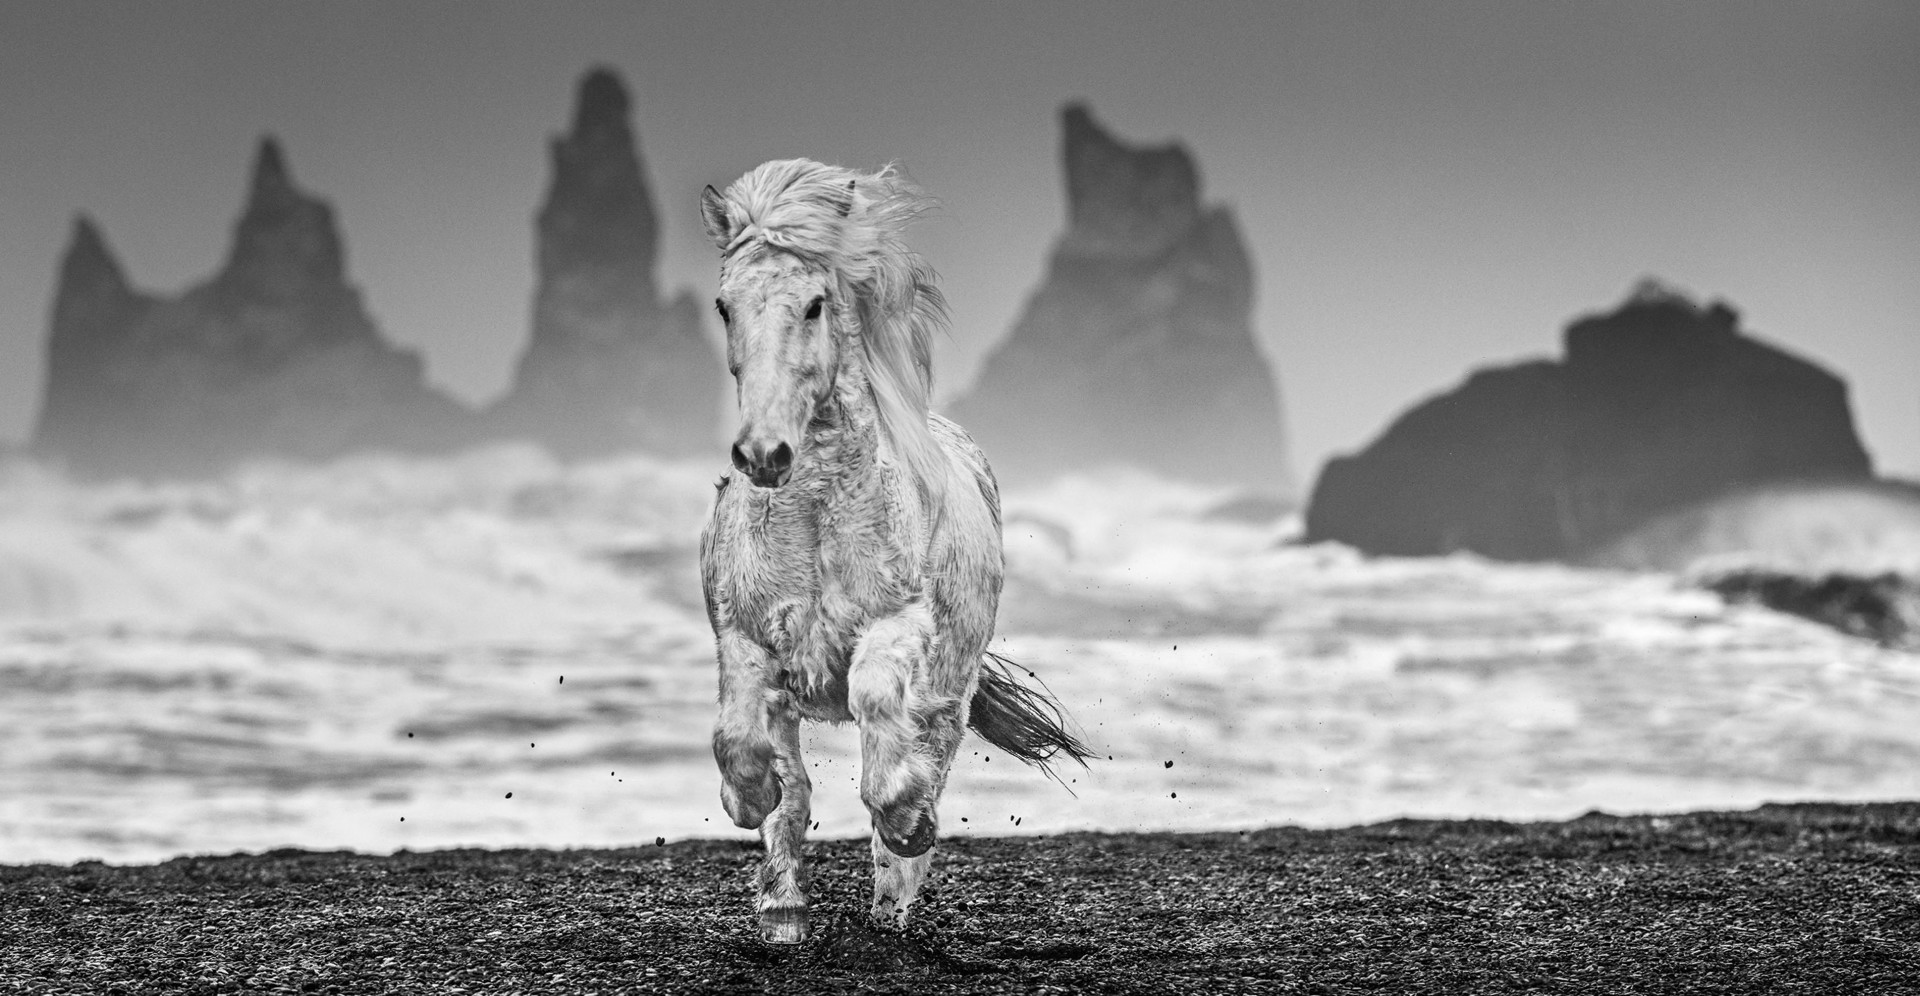 The Perfect Storm by David Yarrow